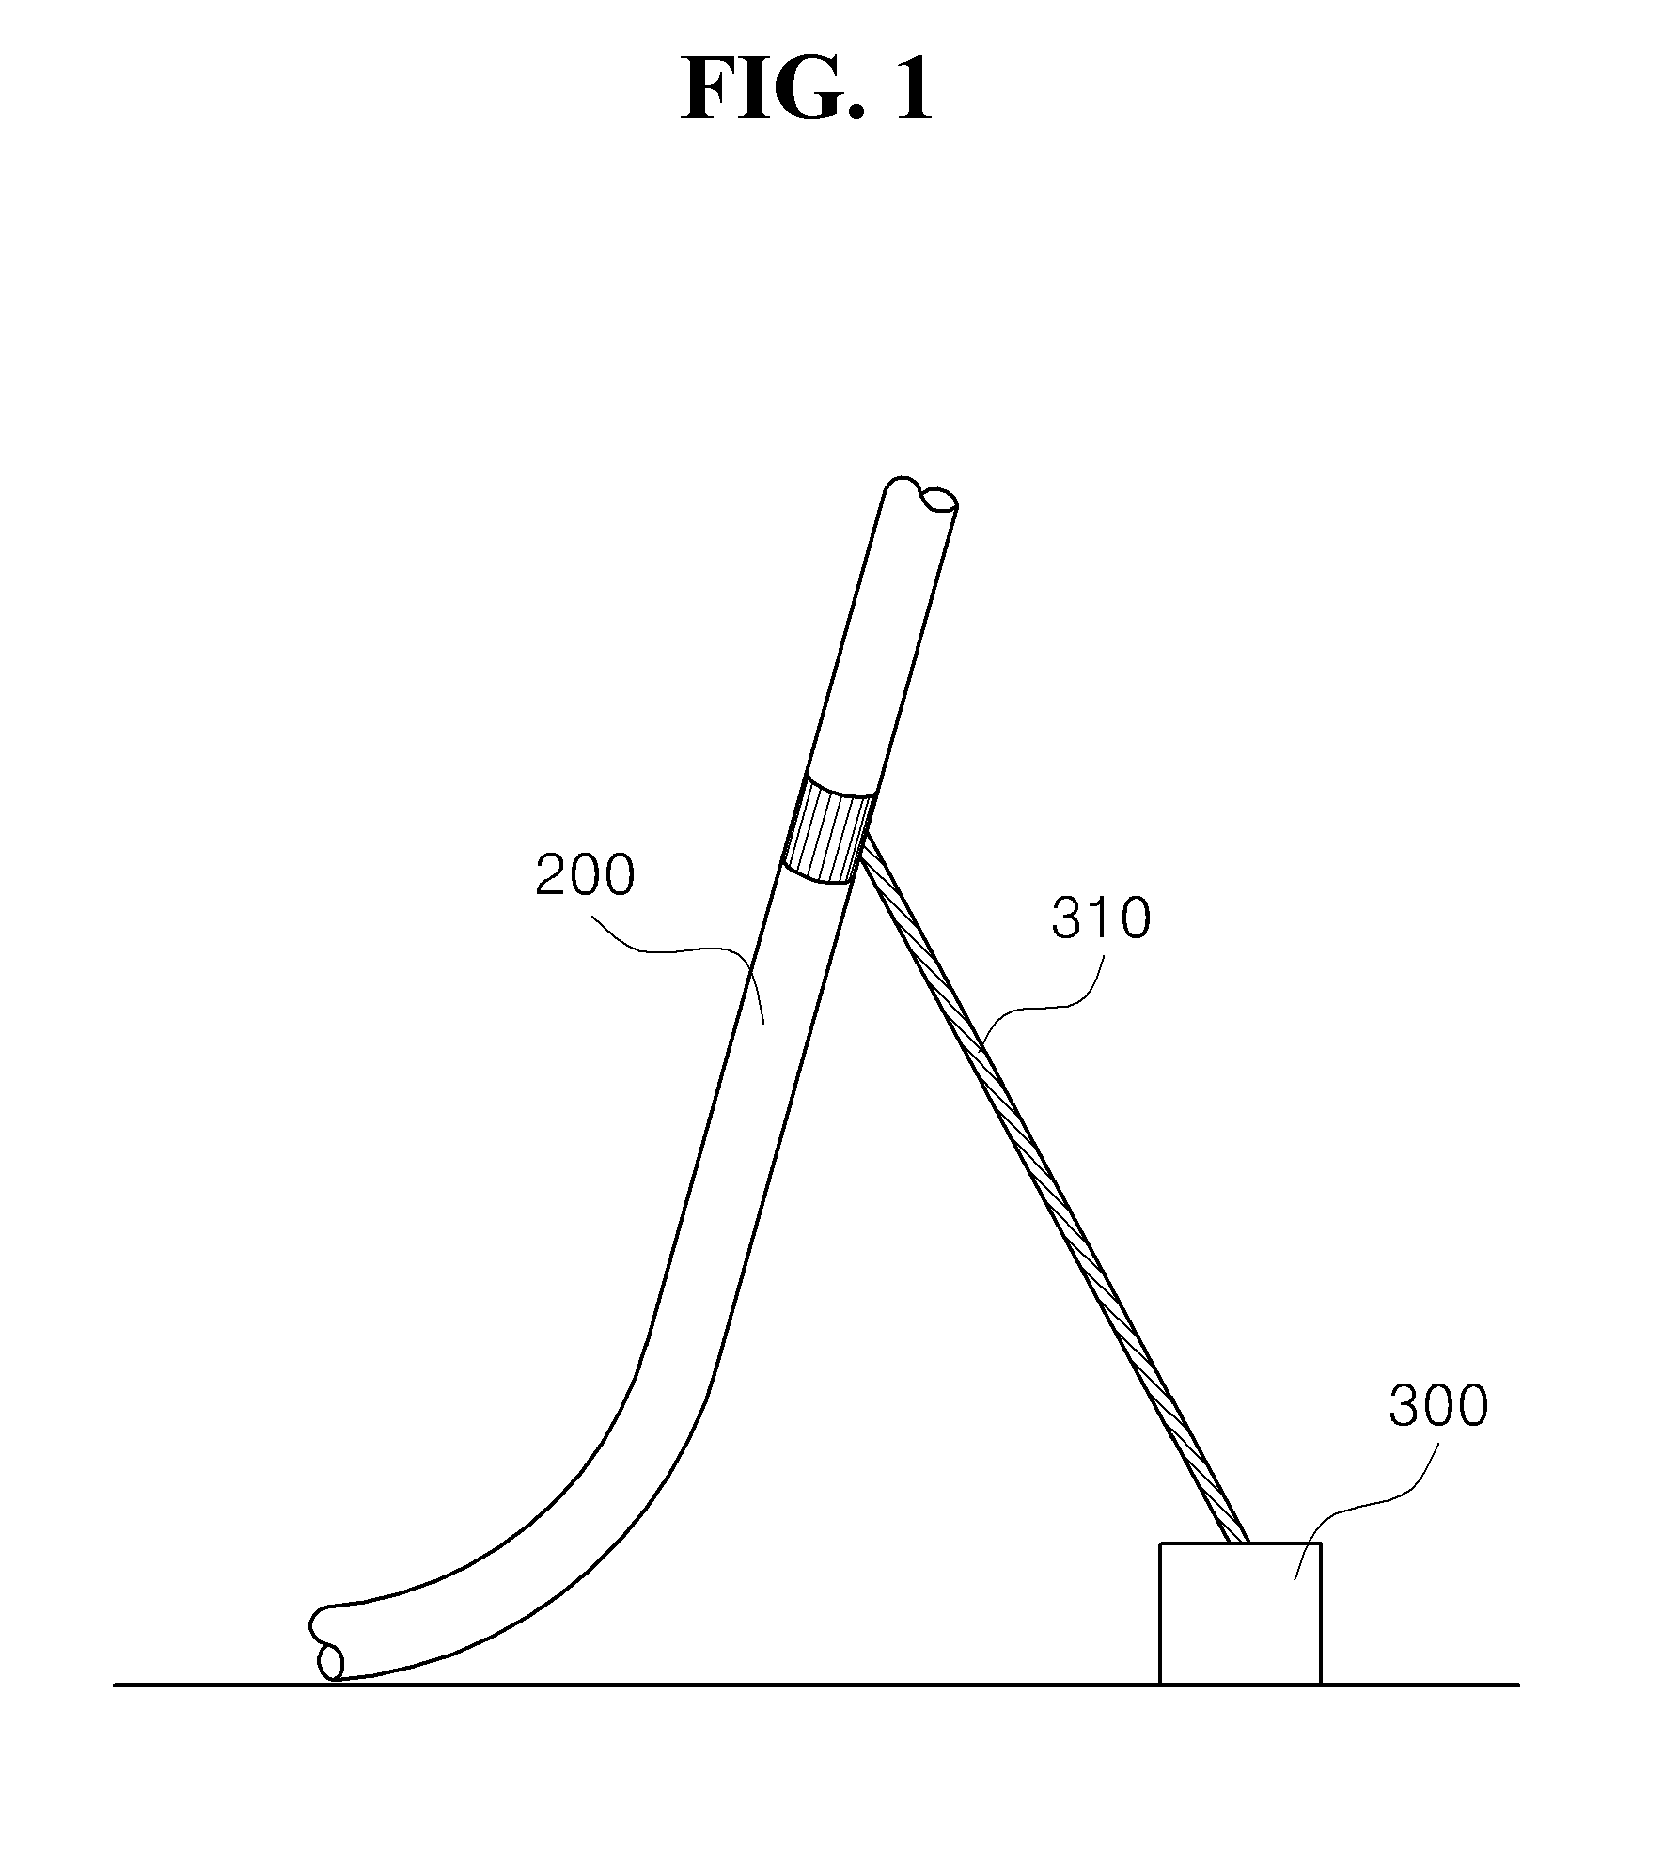 System and method for fuel savings and safe operation of marine structure